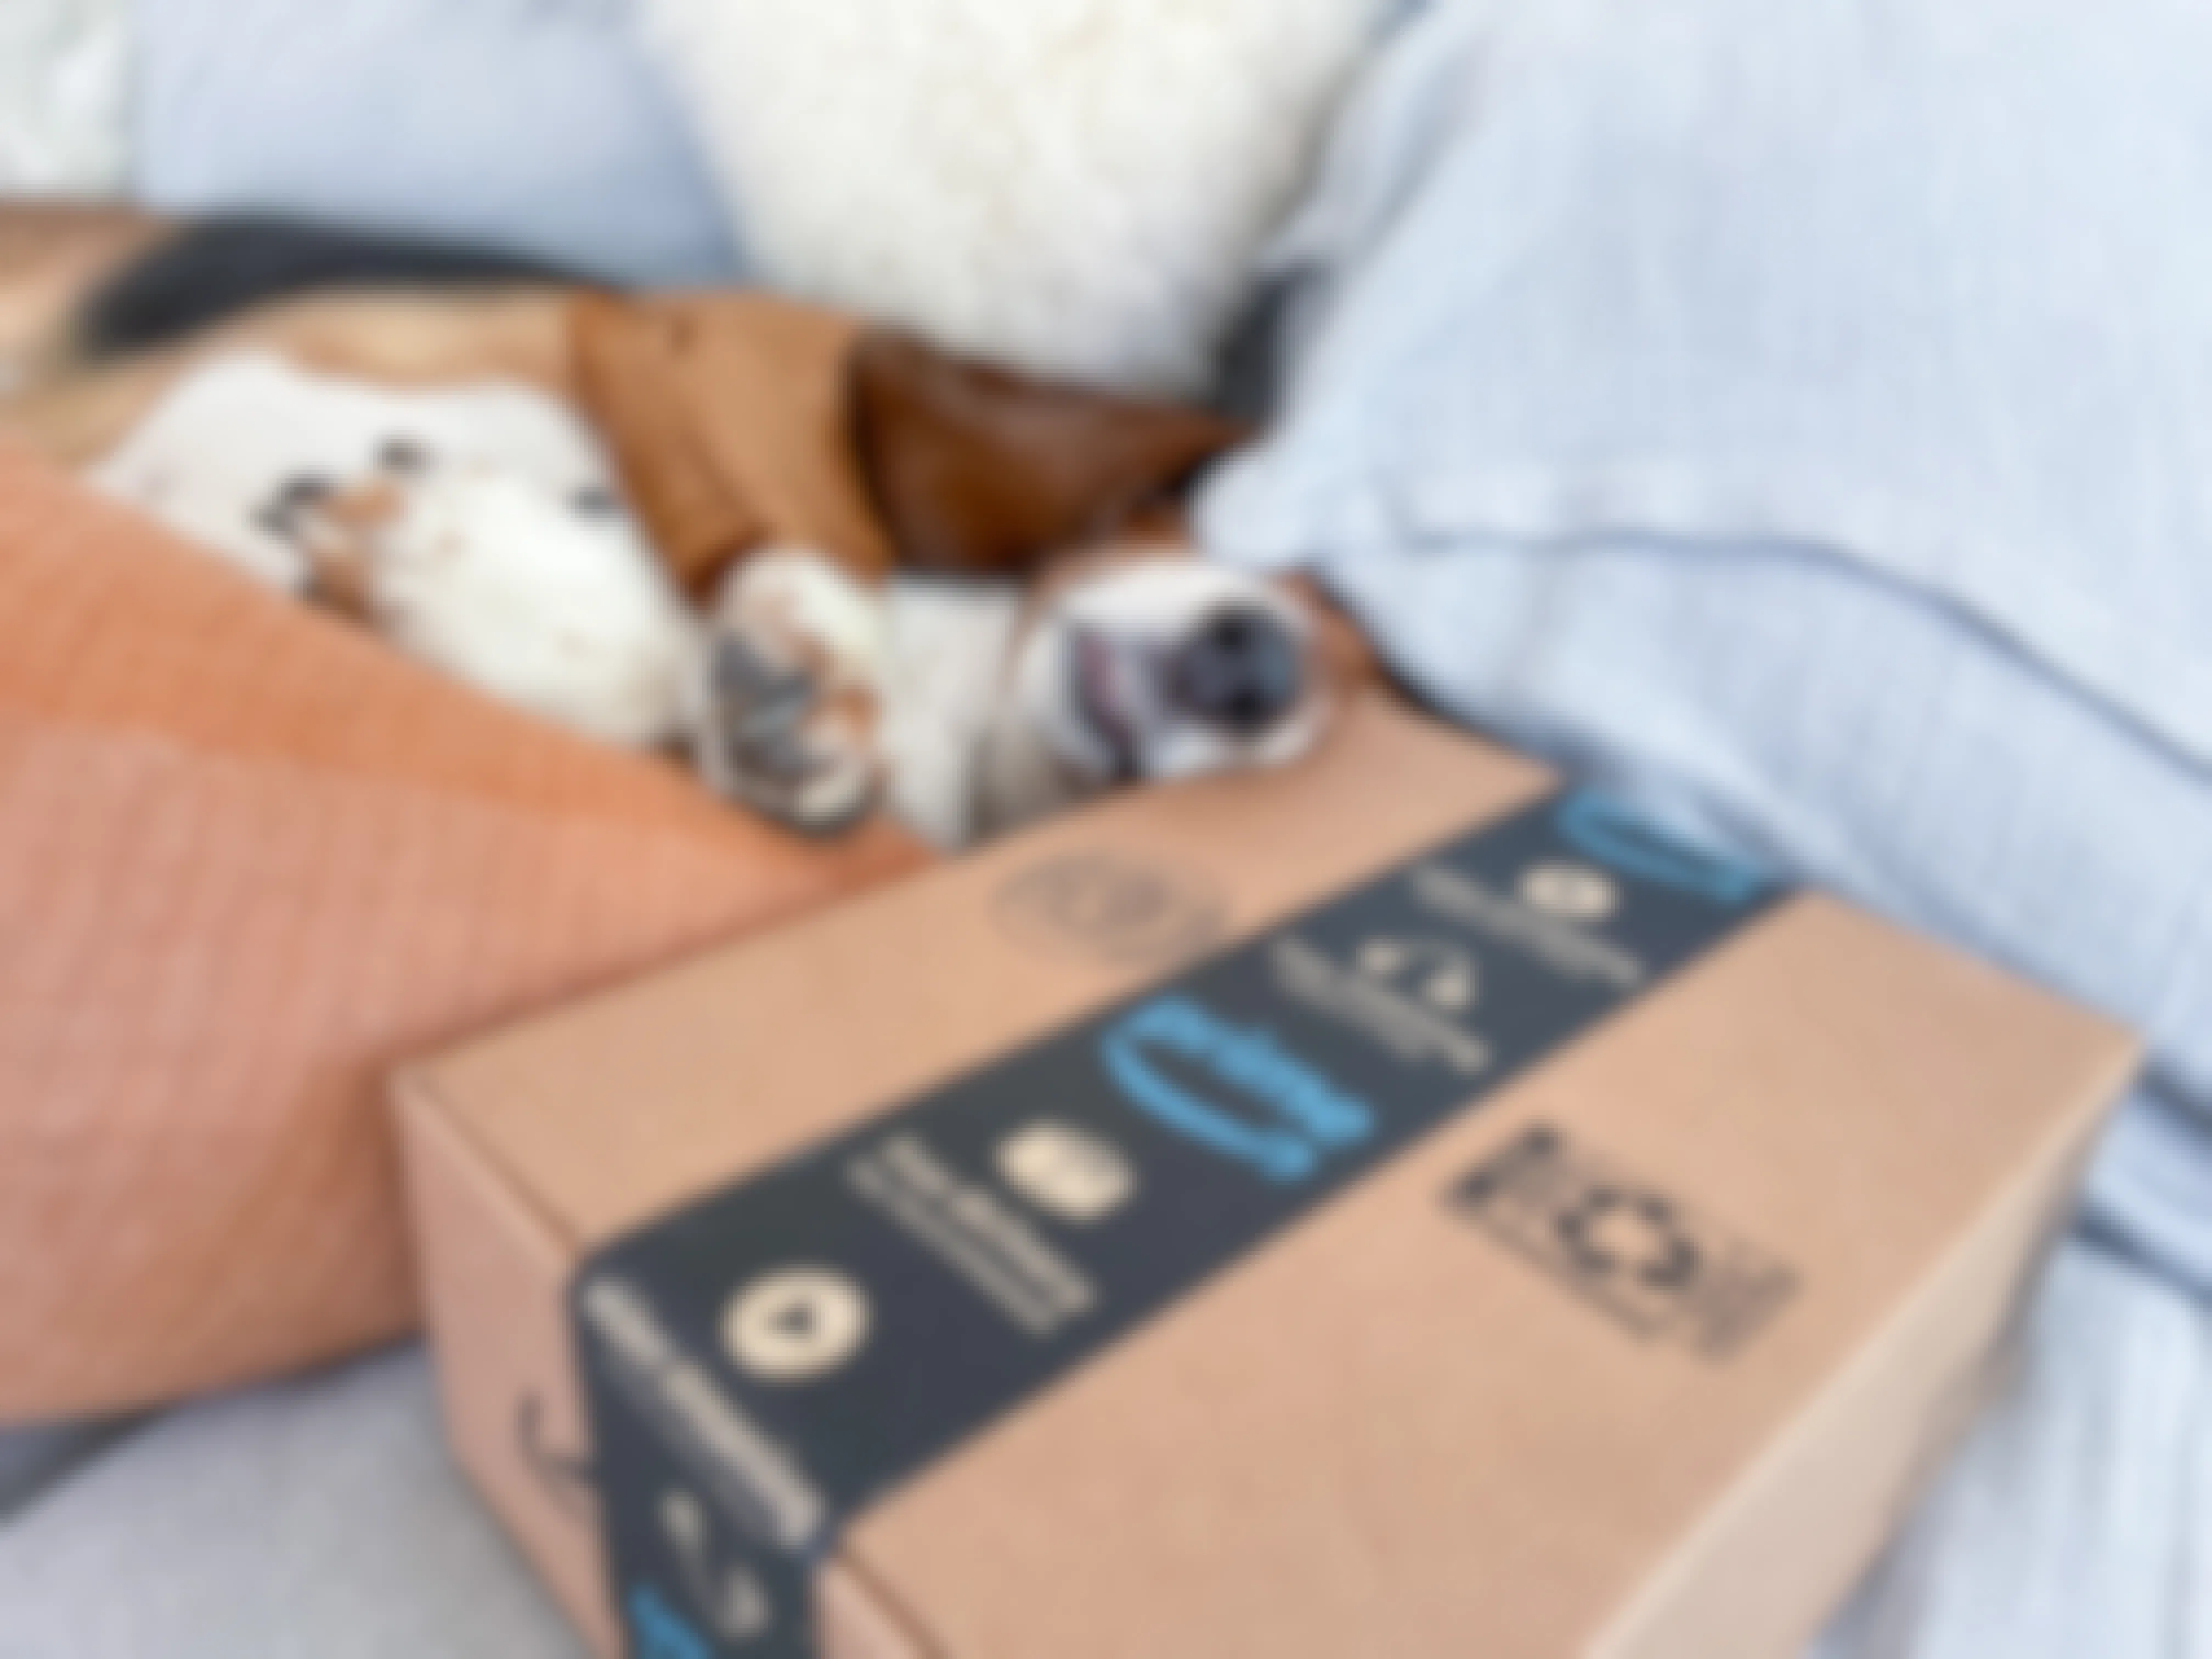 amazon pet day - A dog sleeping on a couch, resting its nose on an Amazon delivery box.